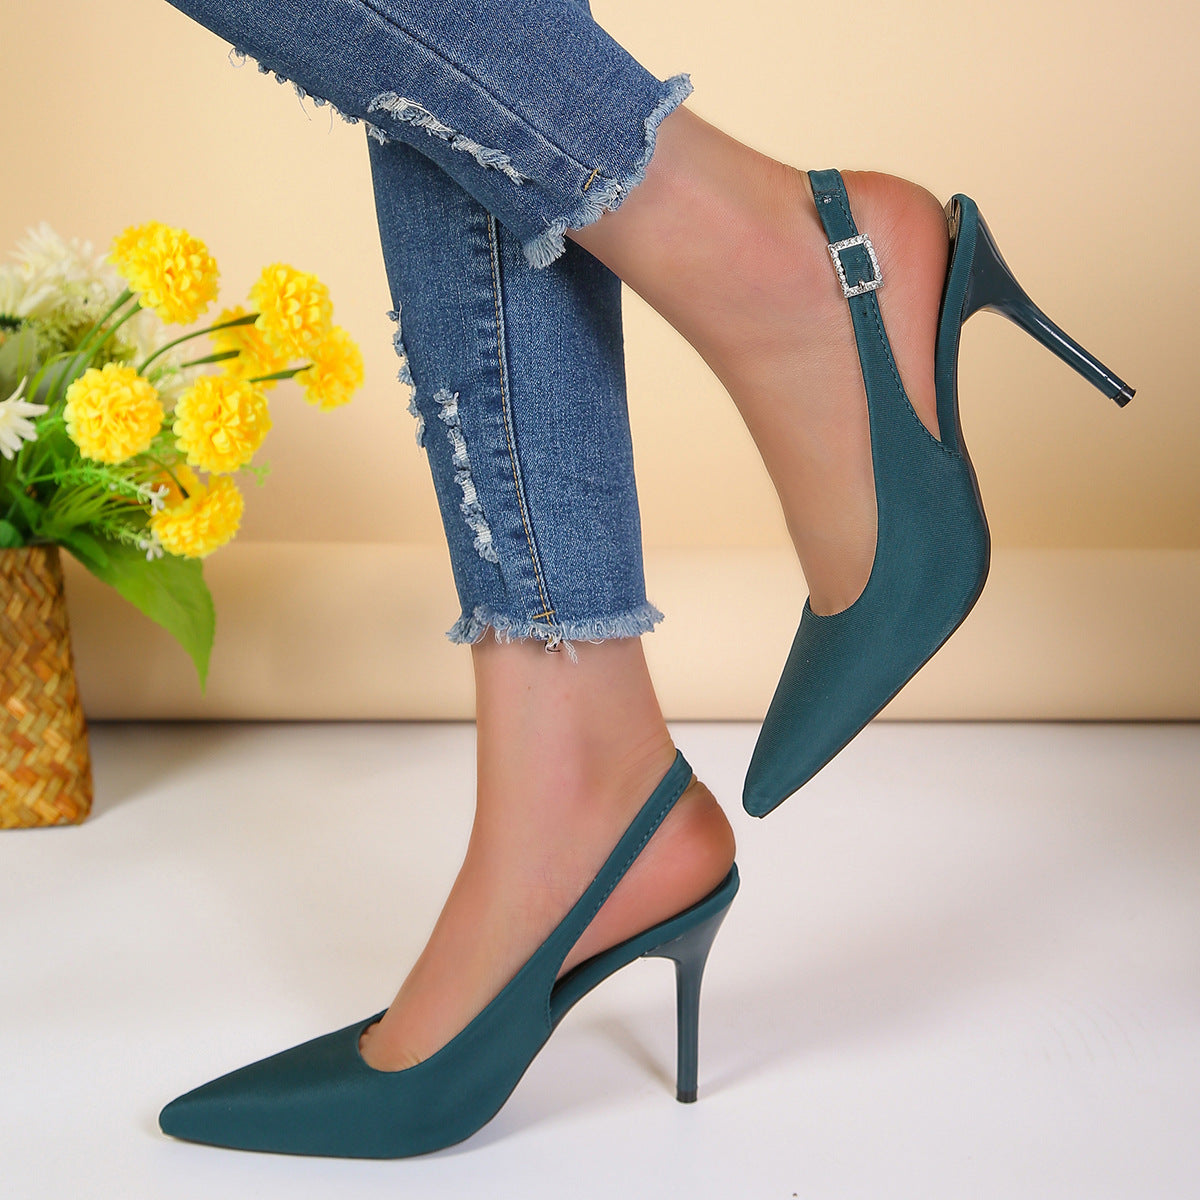 Pointed Toe Fashion Stiletto Heels Shoes For Women